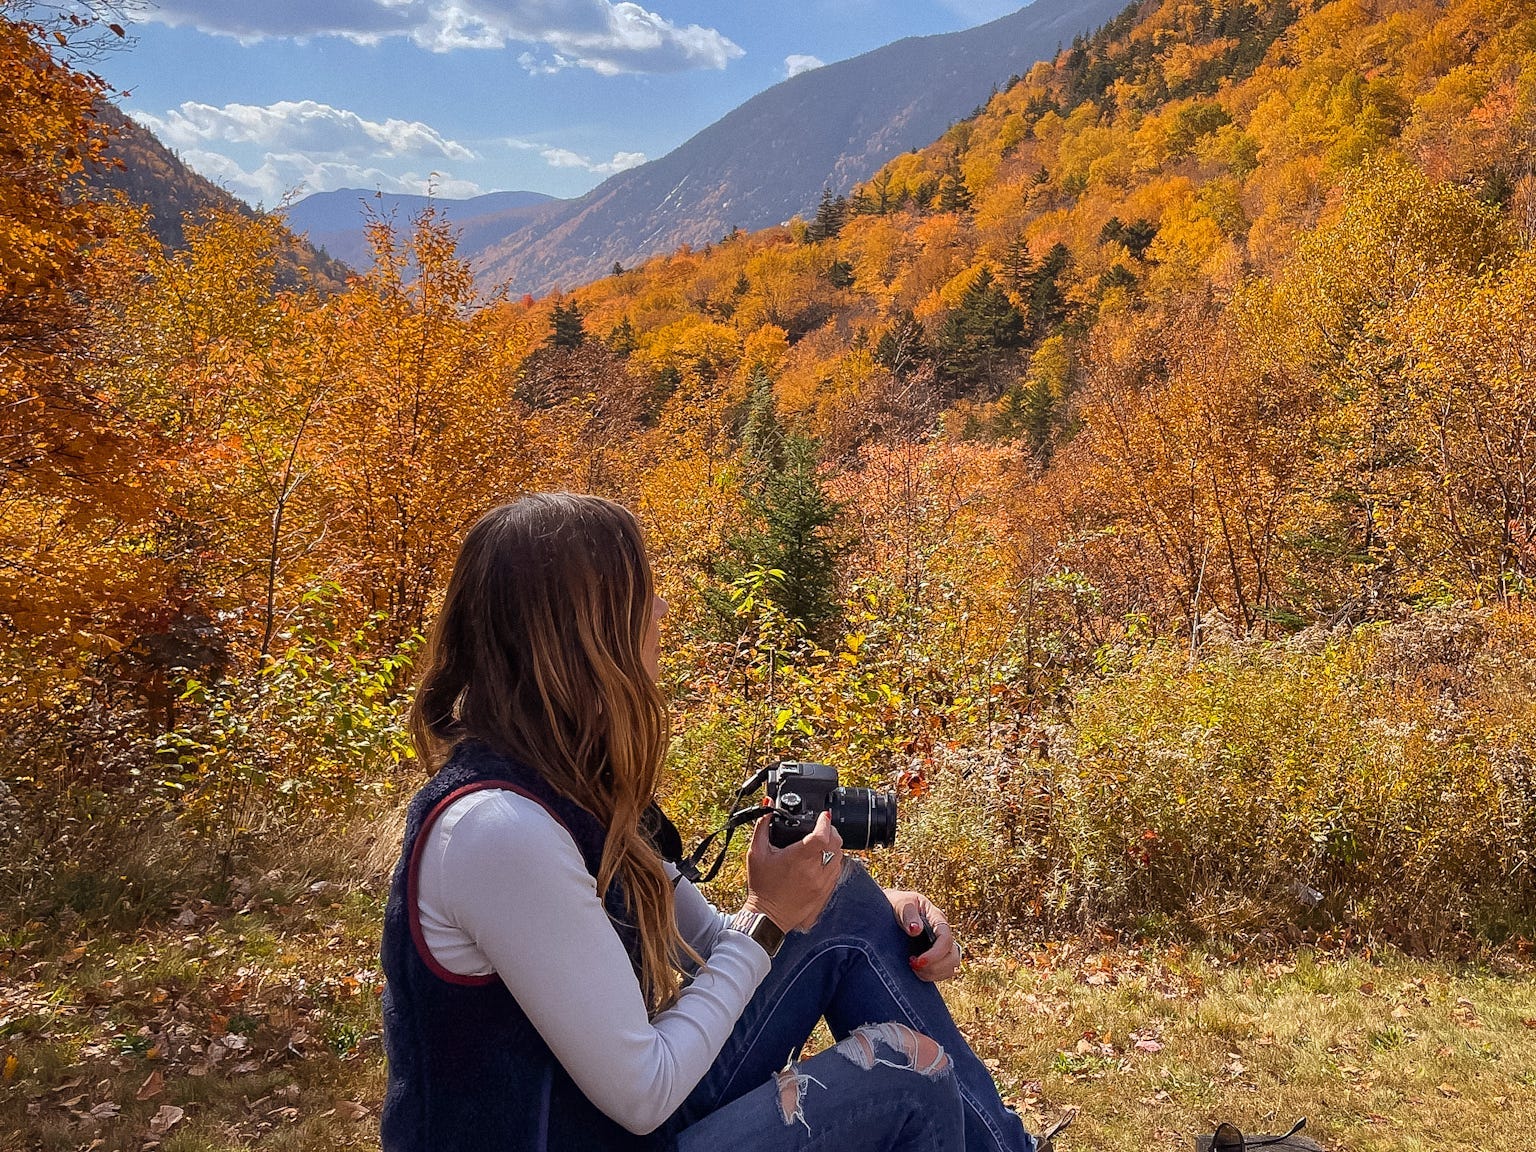 <p>The Northeast is famous for fall foliage, but I can't help but think that New Hampshire is sometimes overshadowed by its neighbors, Maine and Vermont. </p><p>I was stunned by its natural beauty during my first trip to the state. From the White Mountains to Franconia Notch State Park, the state boasts some of the best skiing and hiking in the Northeast.</p>